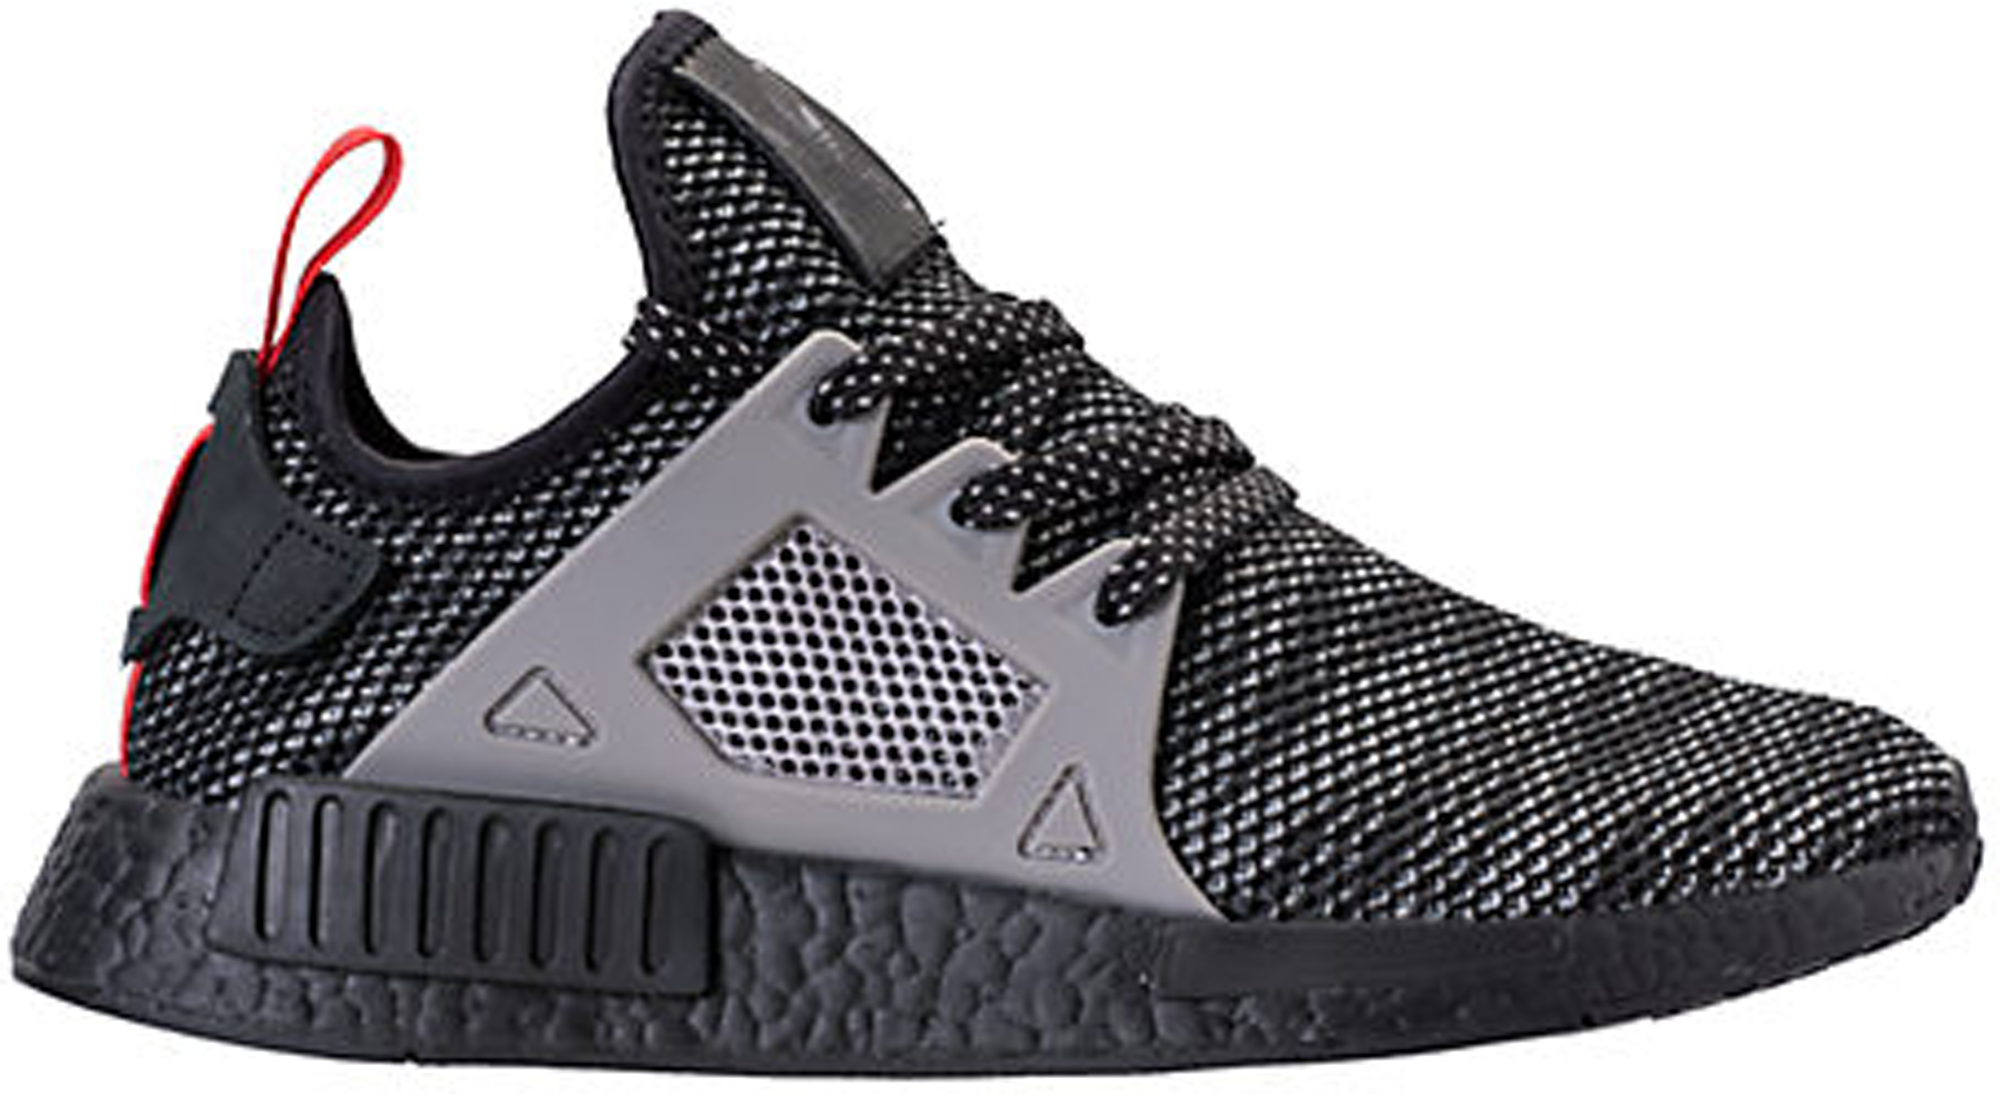 adidas nmd xr1 running shoes